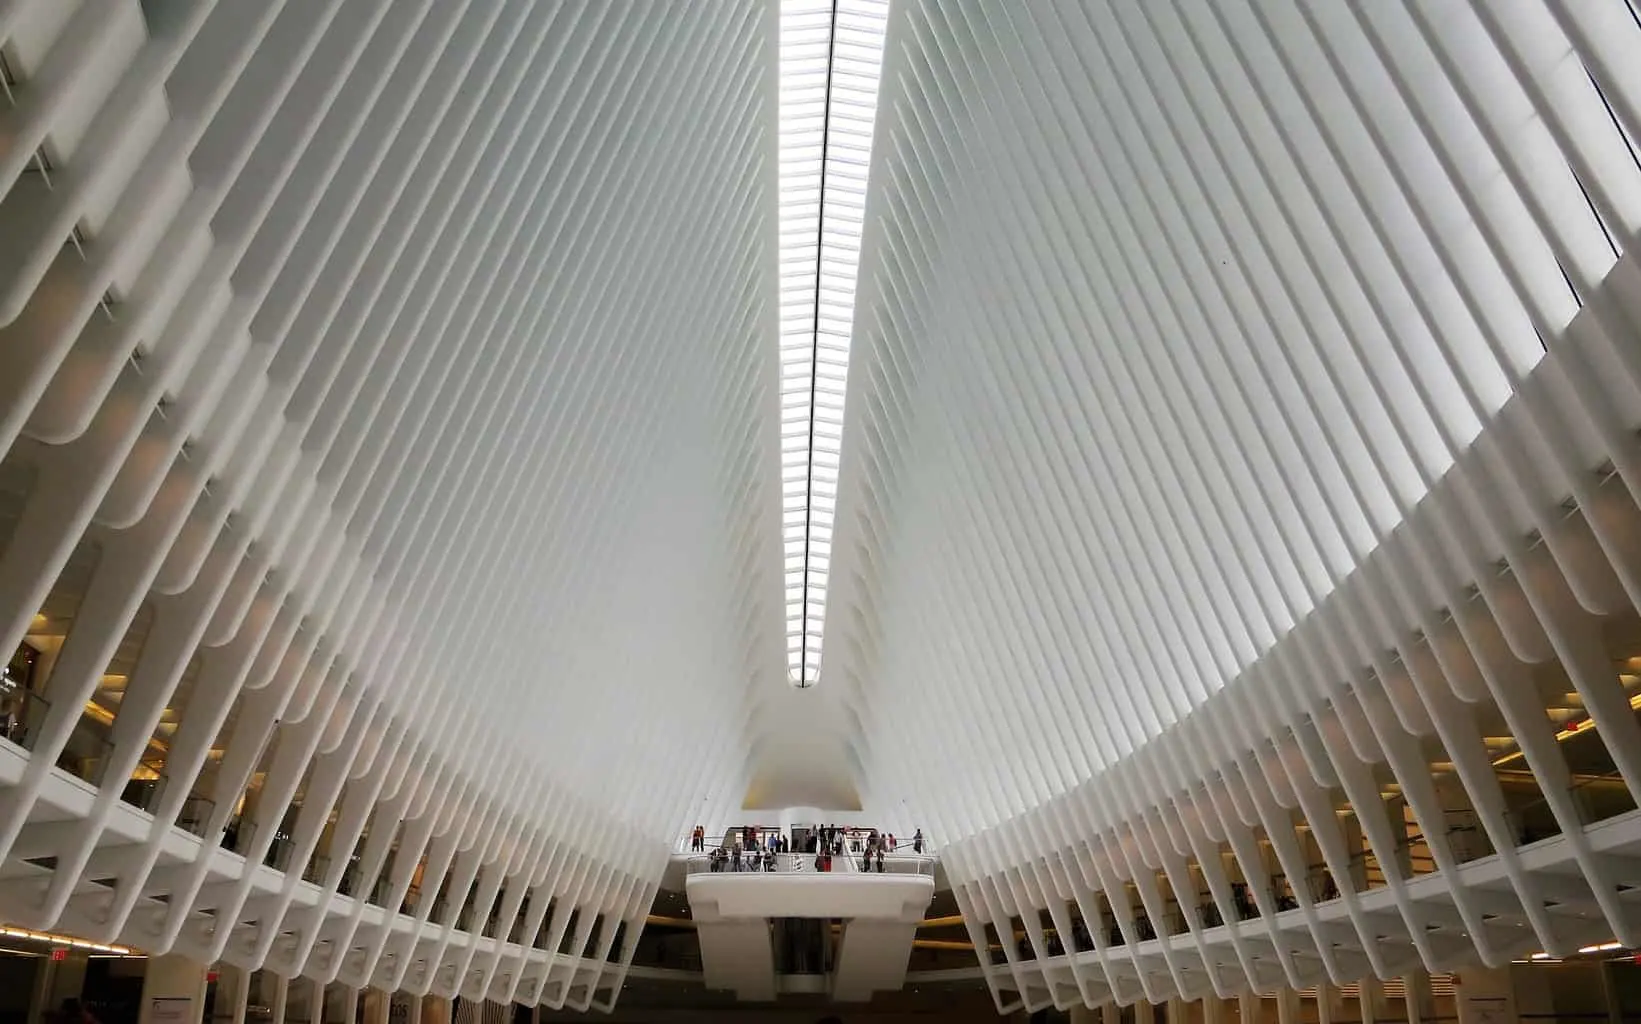 The beautiful modern architecture of the Oculus.